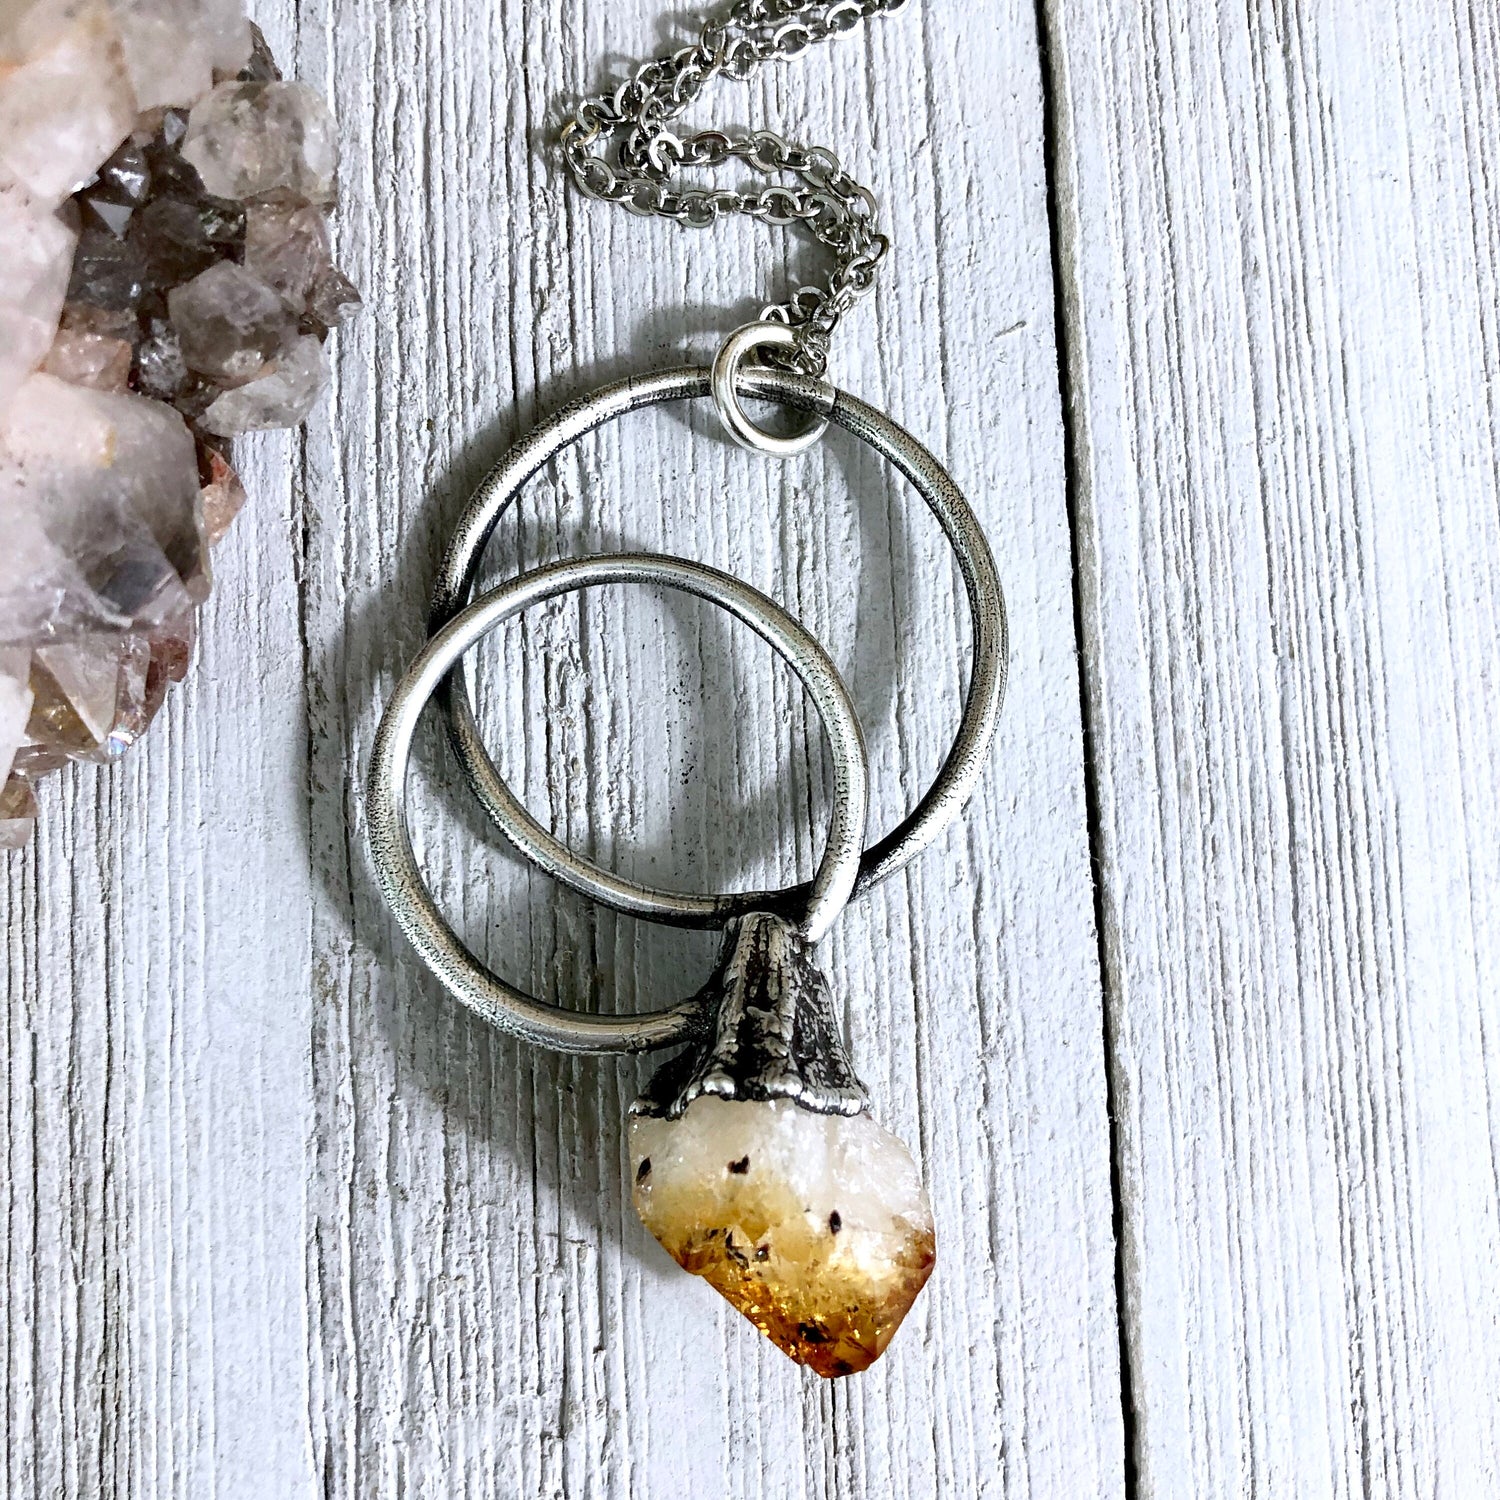 Large Citrine Necklace / Big Crystal Necklace Silver / Natural Crystal Jewelry